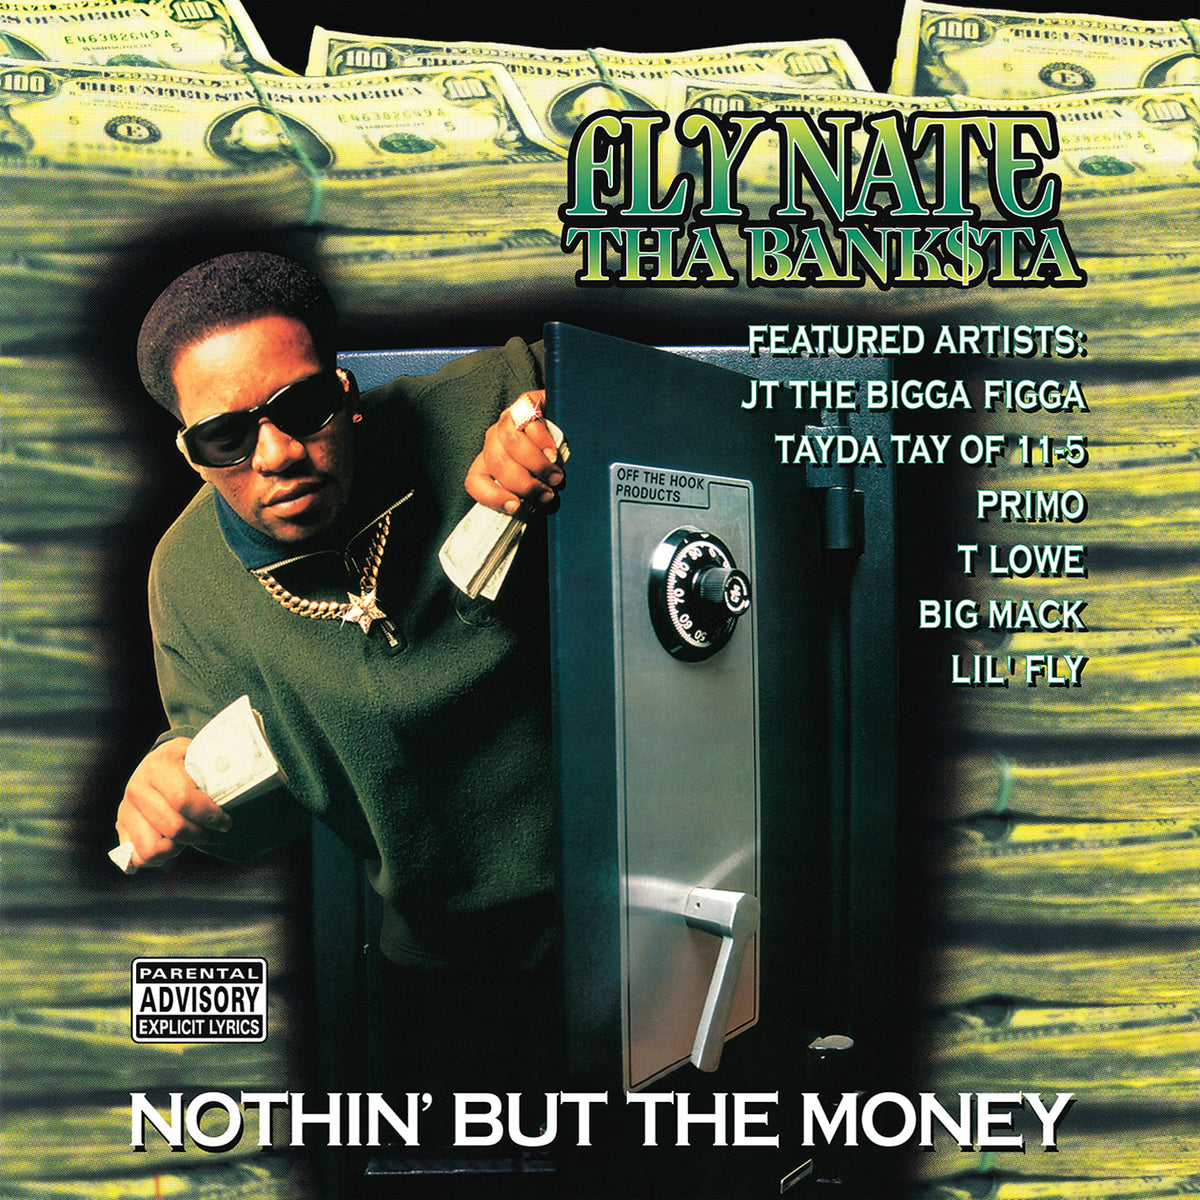 Fly Nate Tha Banksta - Nothin' But The Money [2CD] – Hella Dope